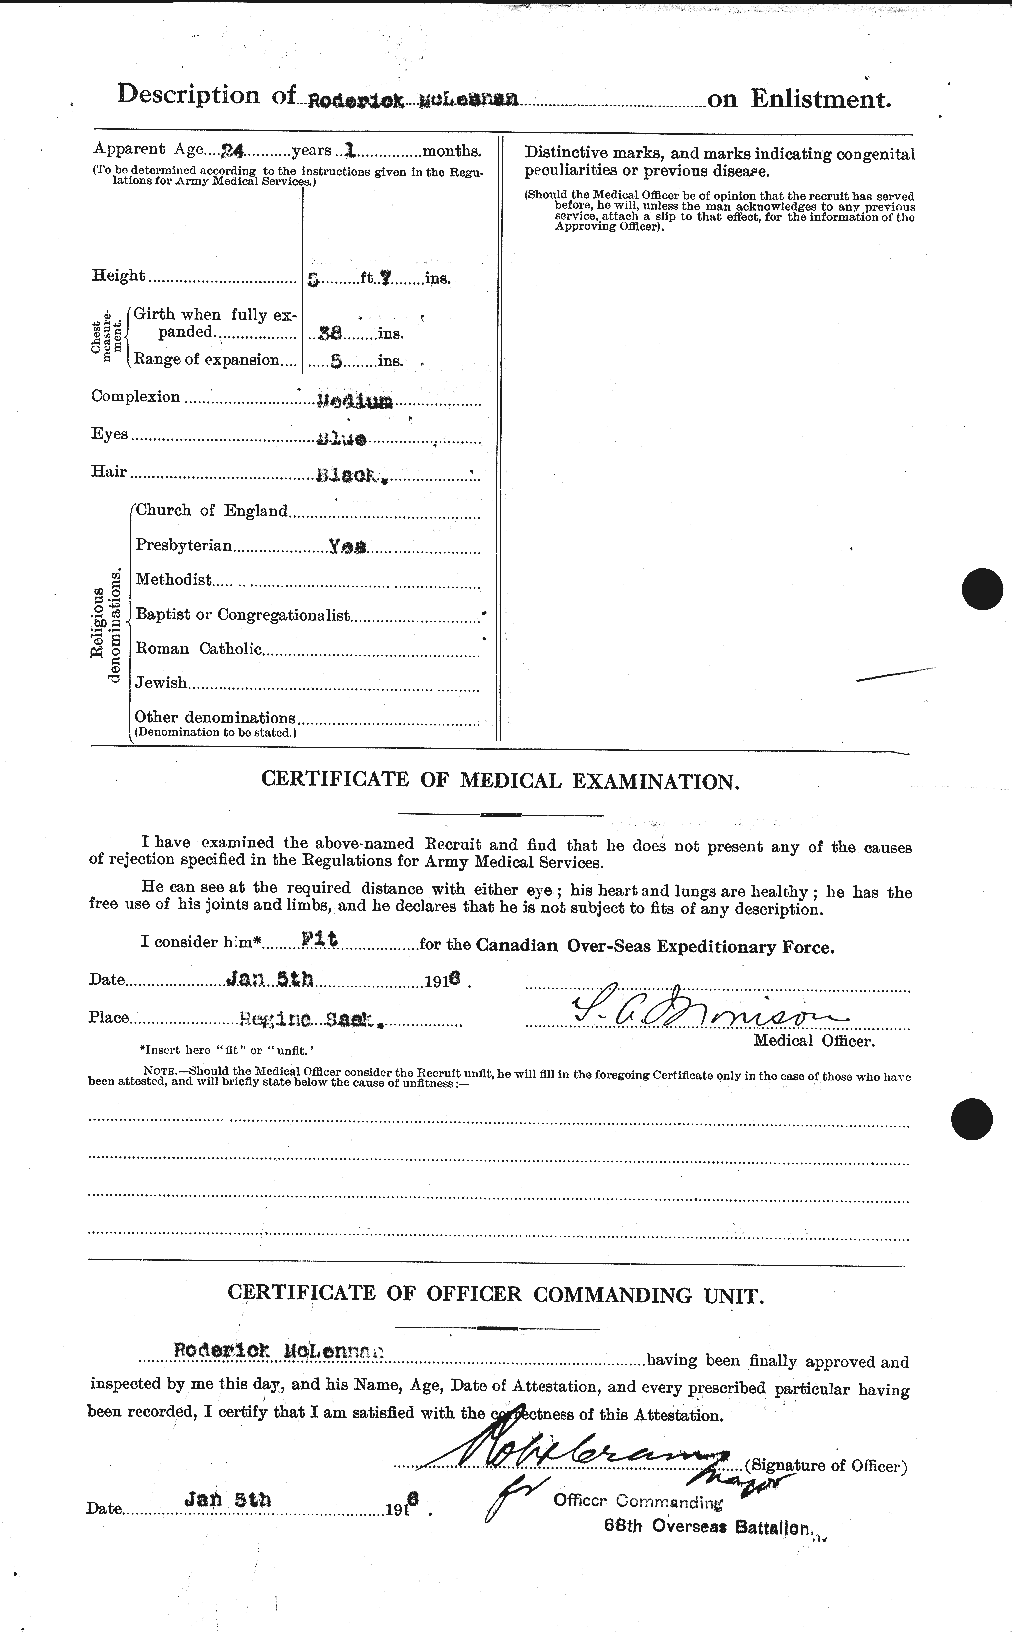 Personnel Records of the First World War - CEF 536611b